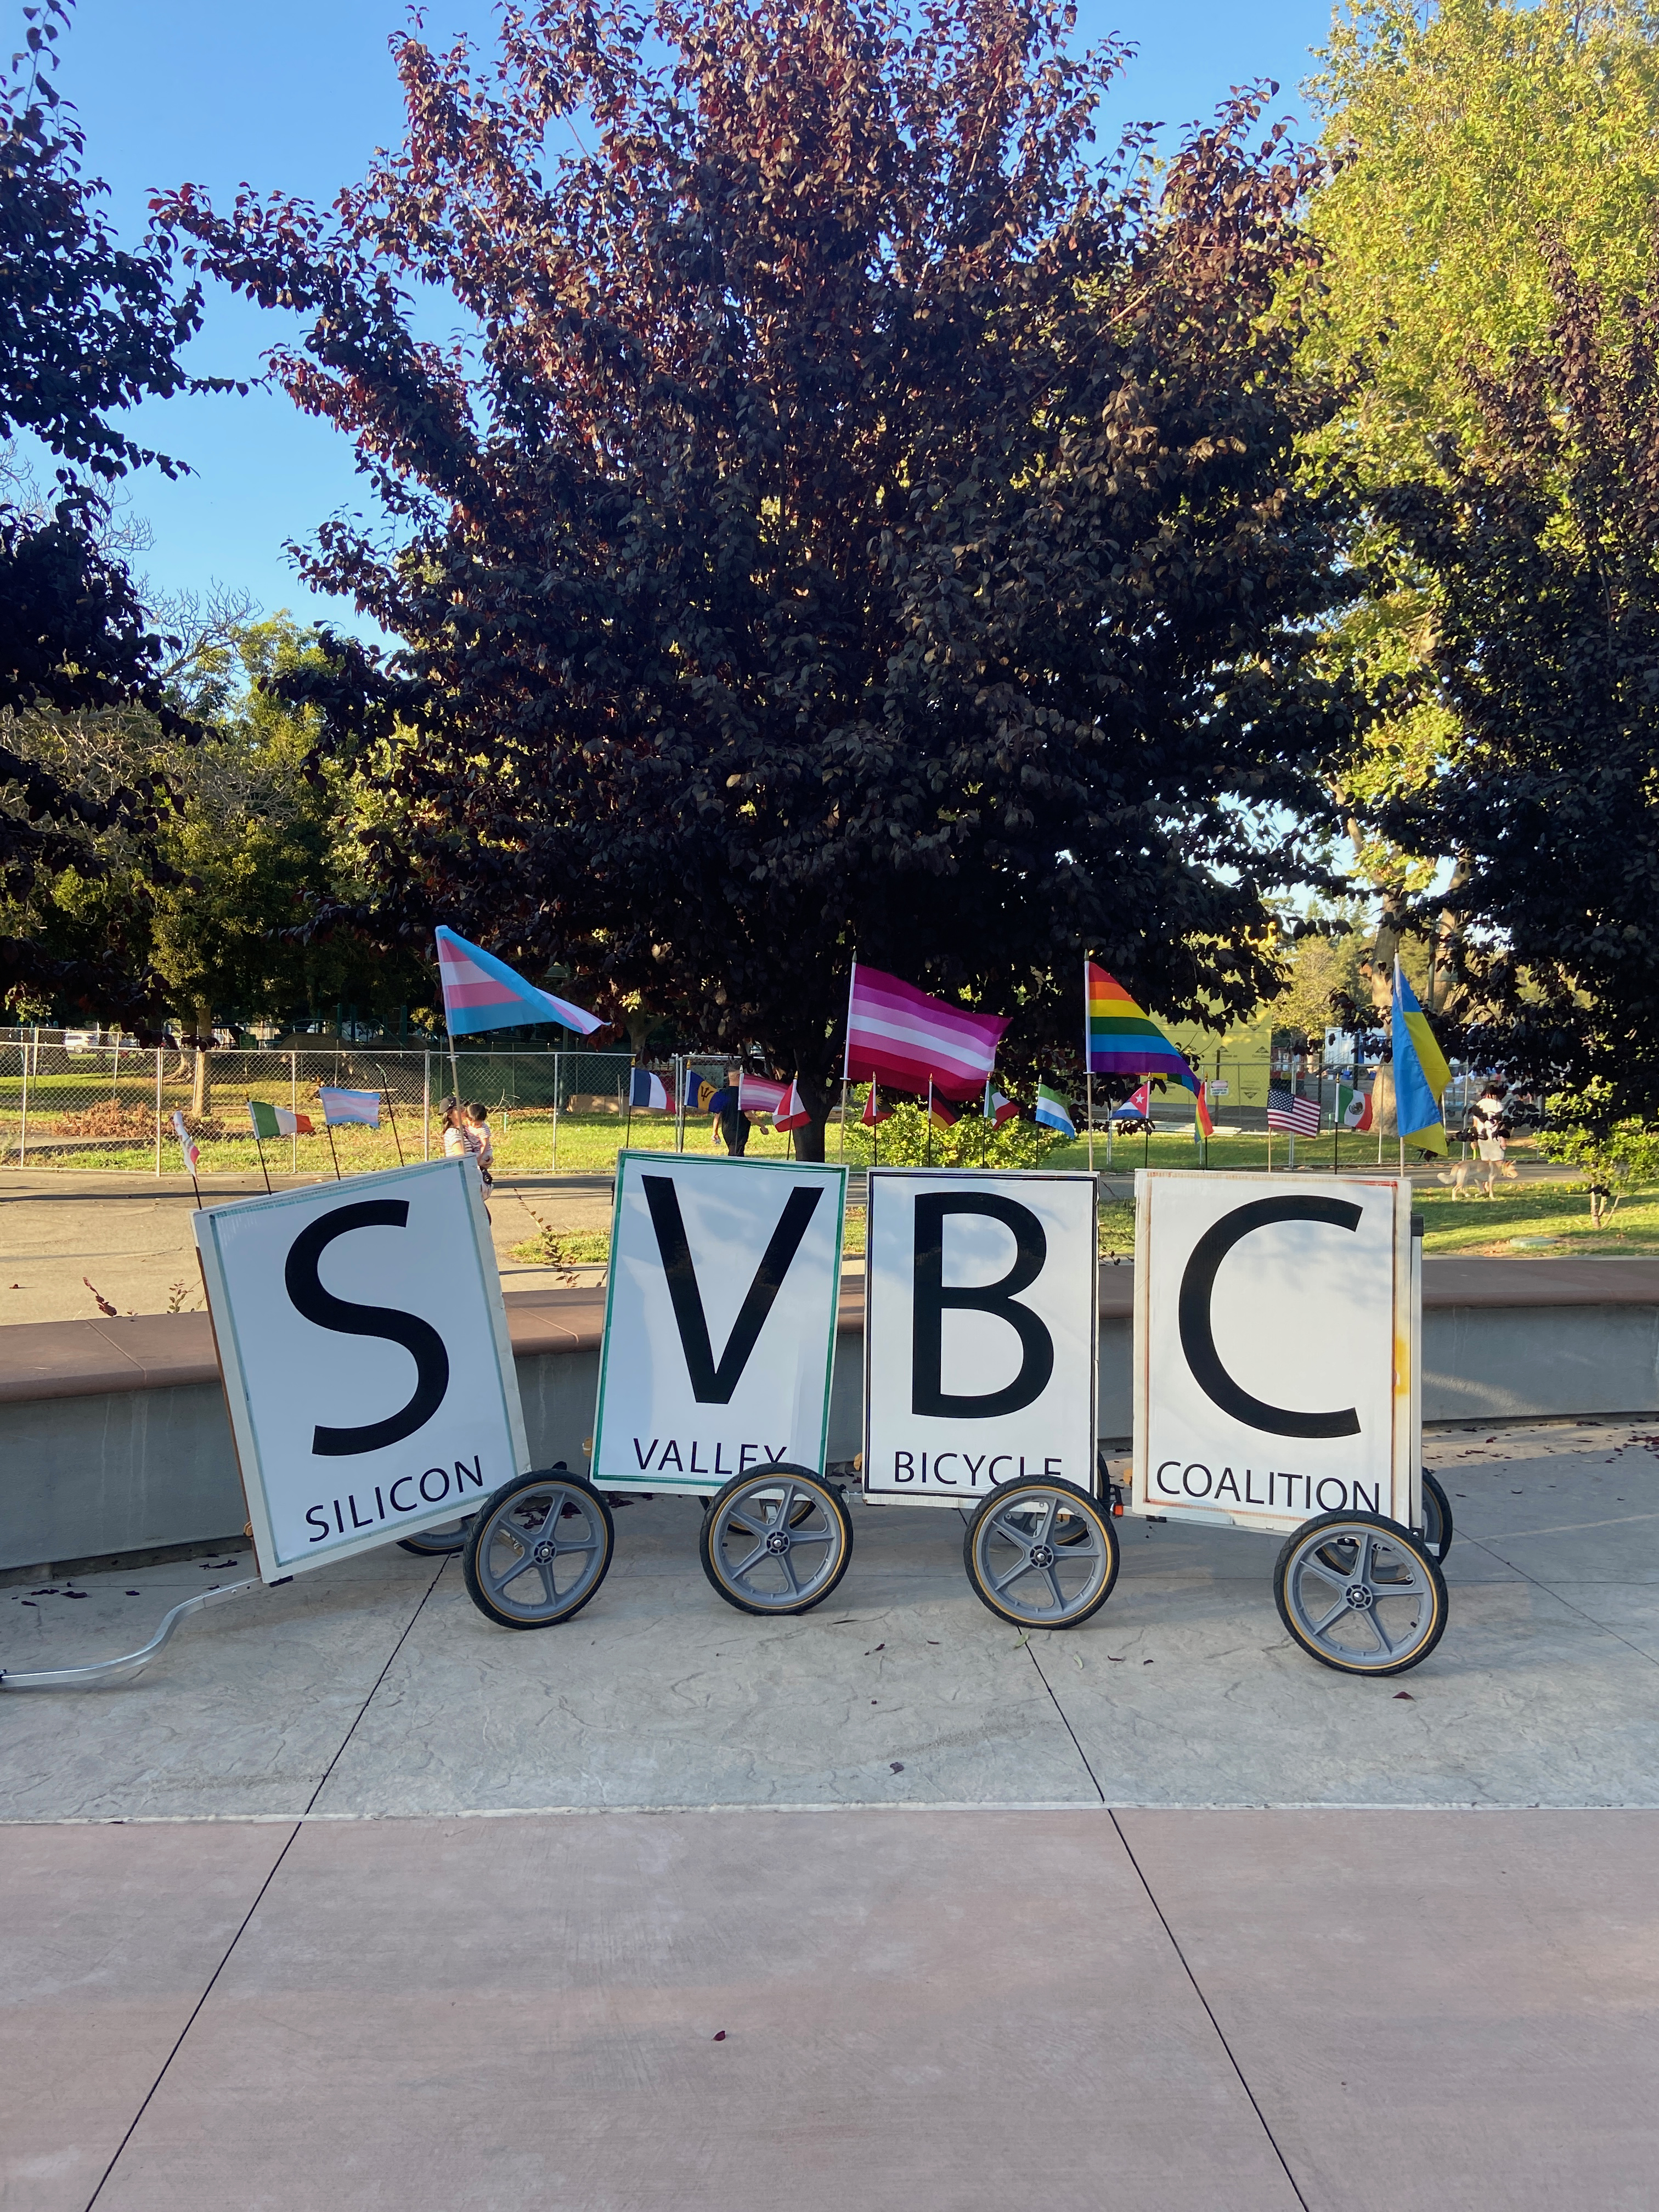 Silicon Valley Bicycle Coalition